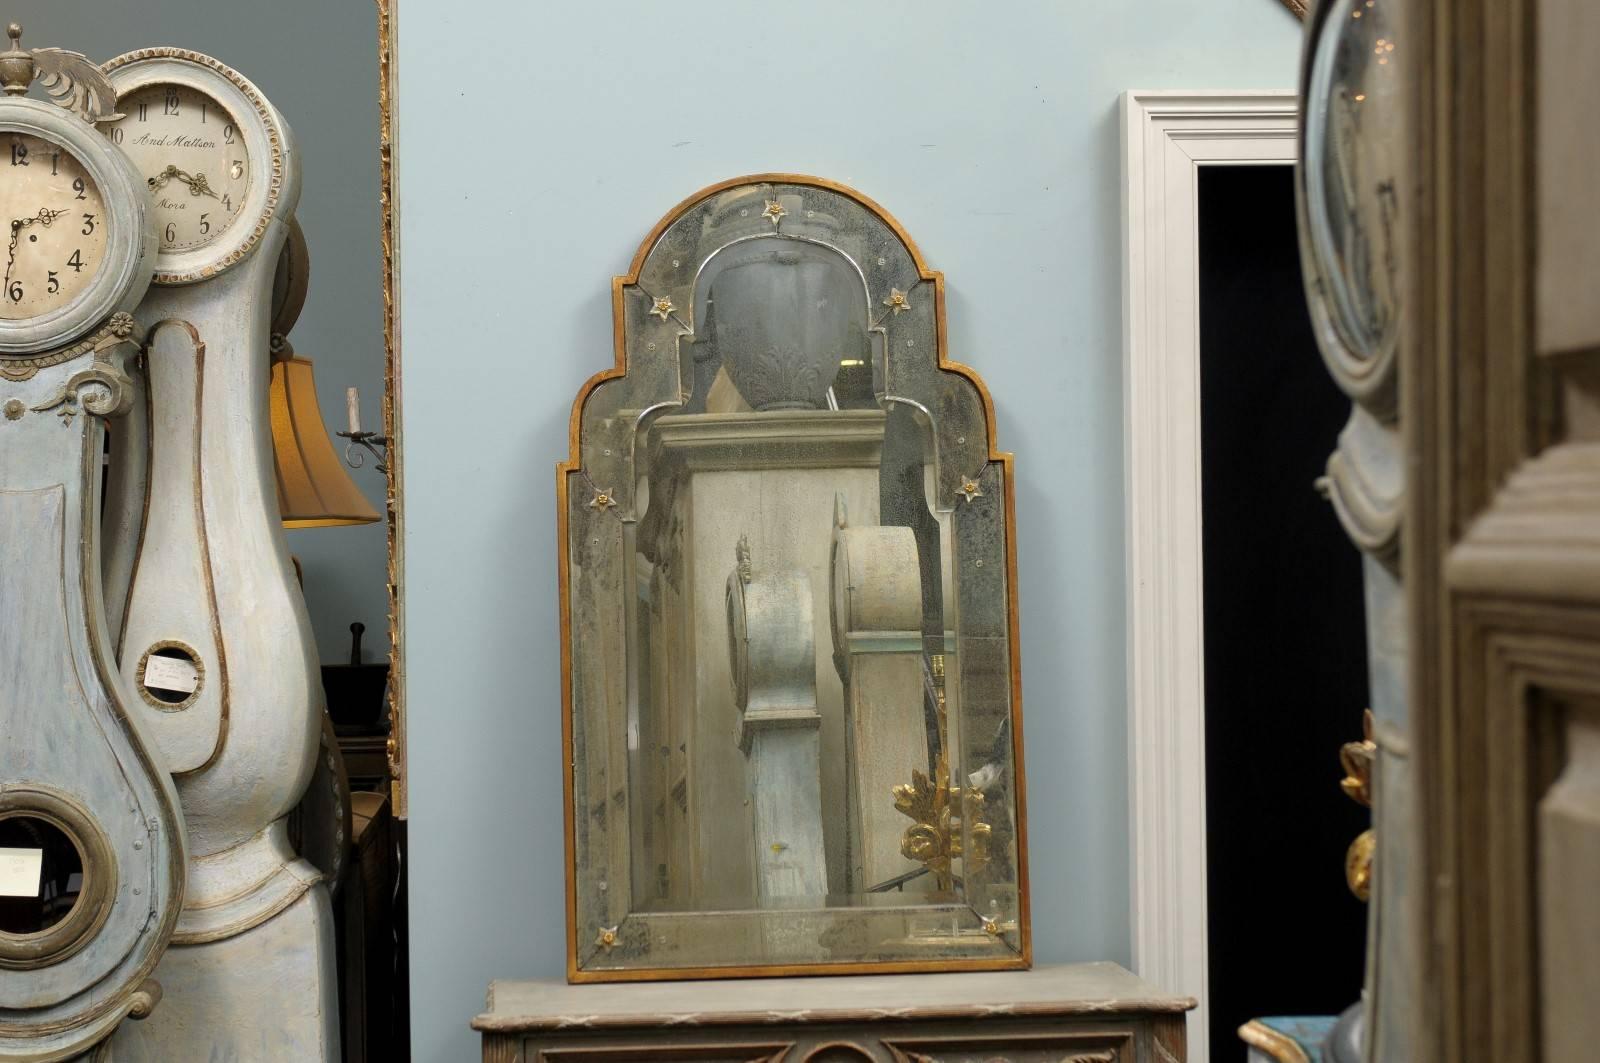 Gilt Paris Venetian Style Mirror with Bonnet Type Crest and Gilded Frame